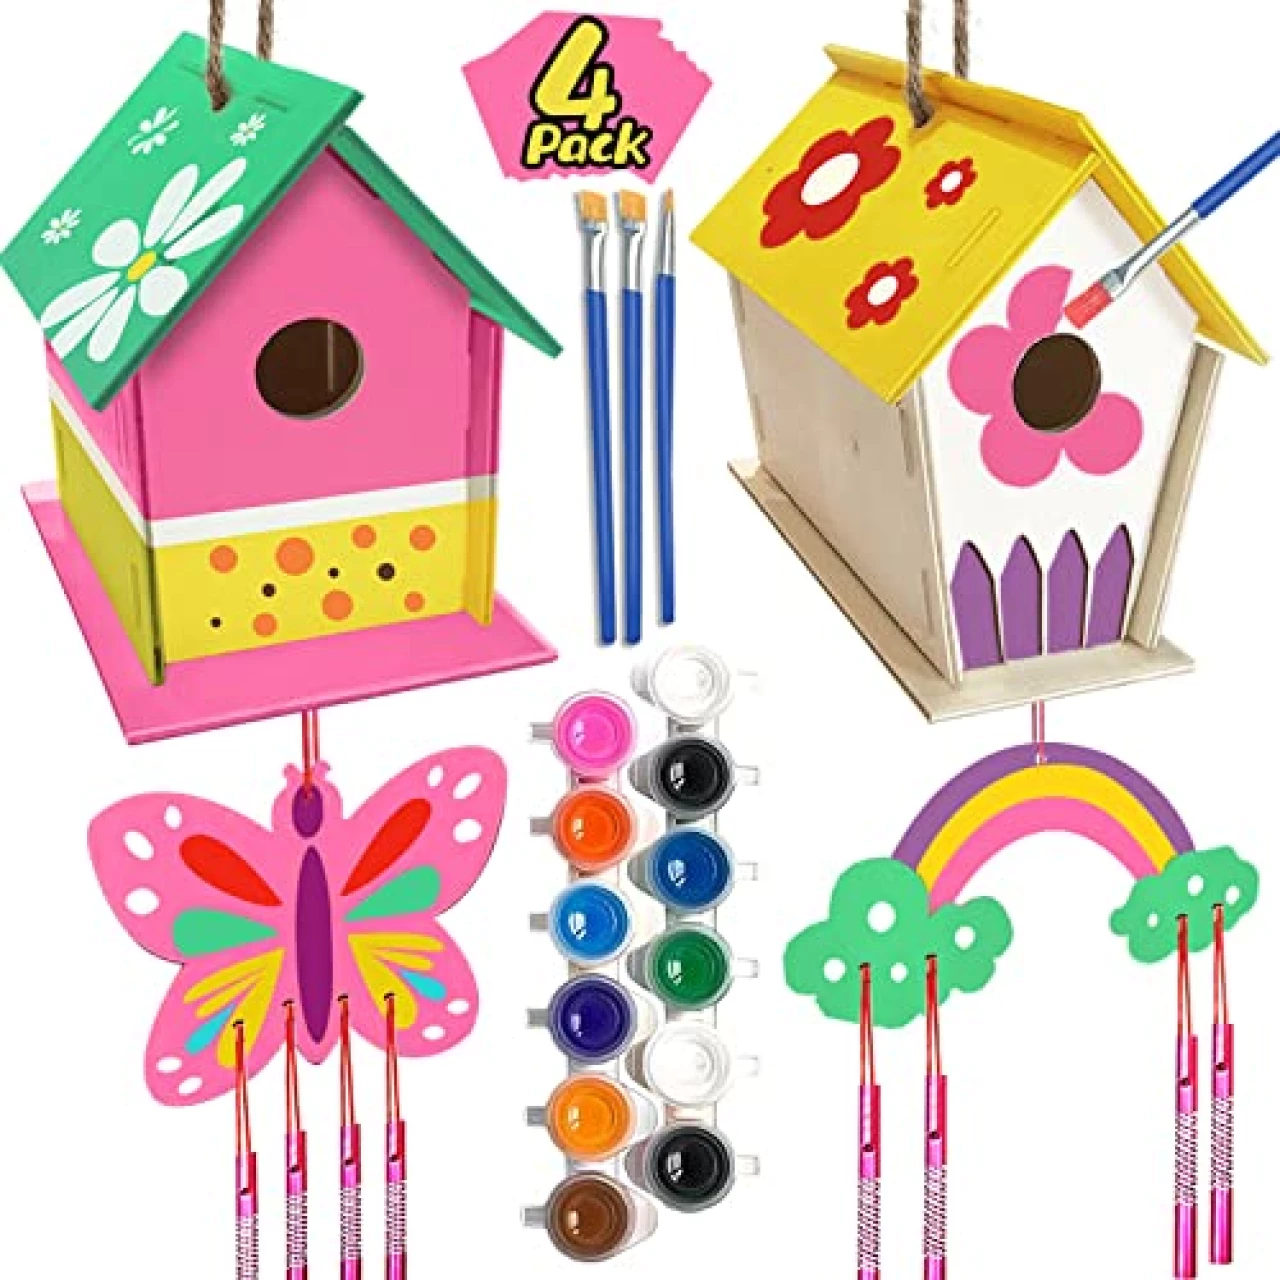 Crafts for Kids Ages 4-8 - 4 Pack DIY Bird House Wind Chime Kit - Build and Paint Birdhouses Wooden Arts Kits